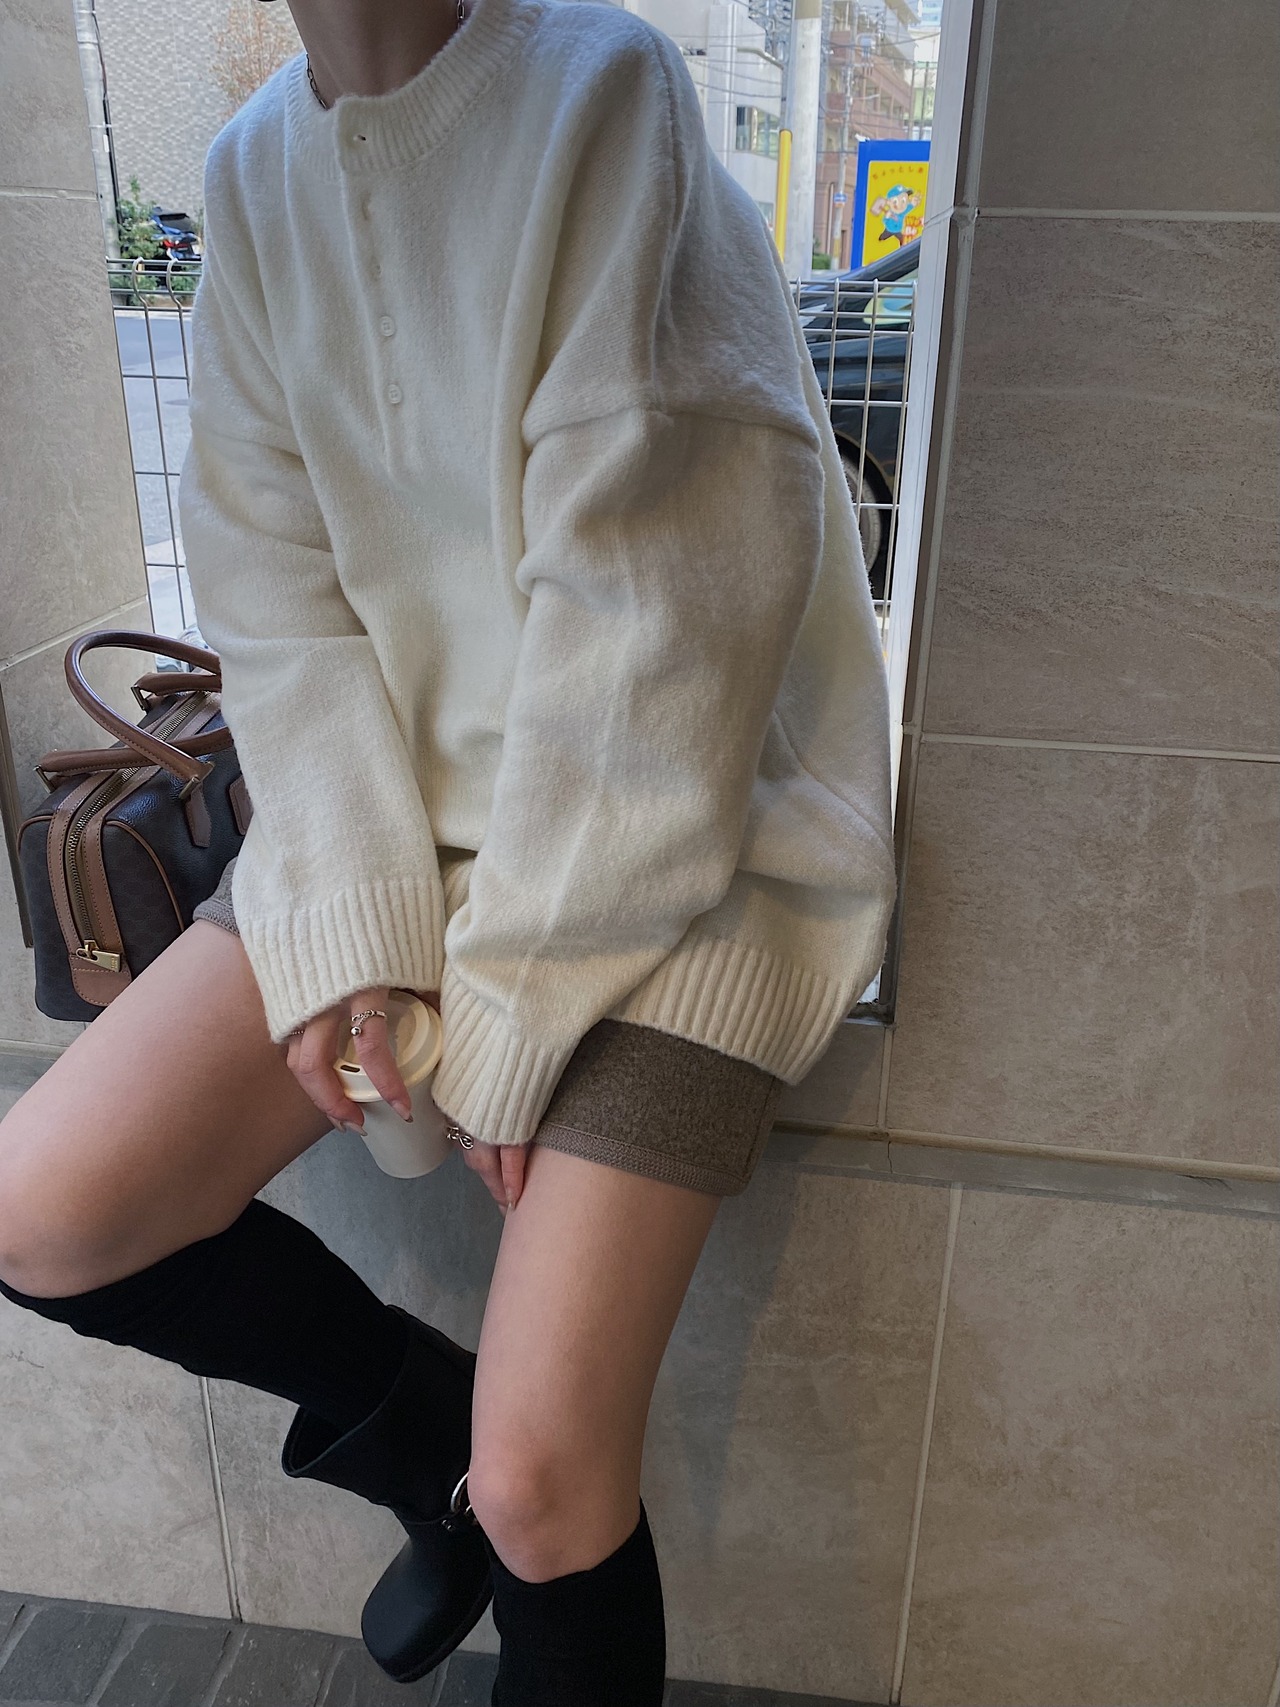 front button big silhouette knit